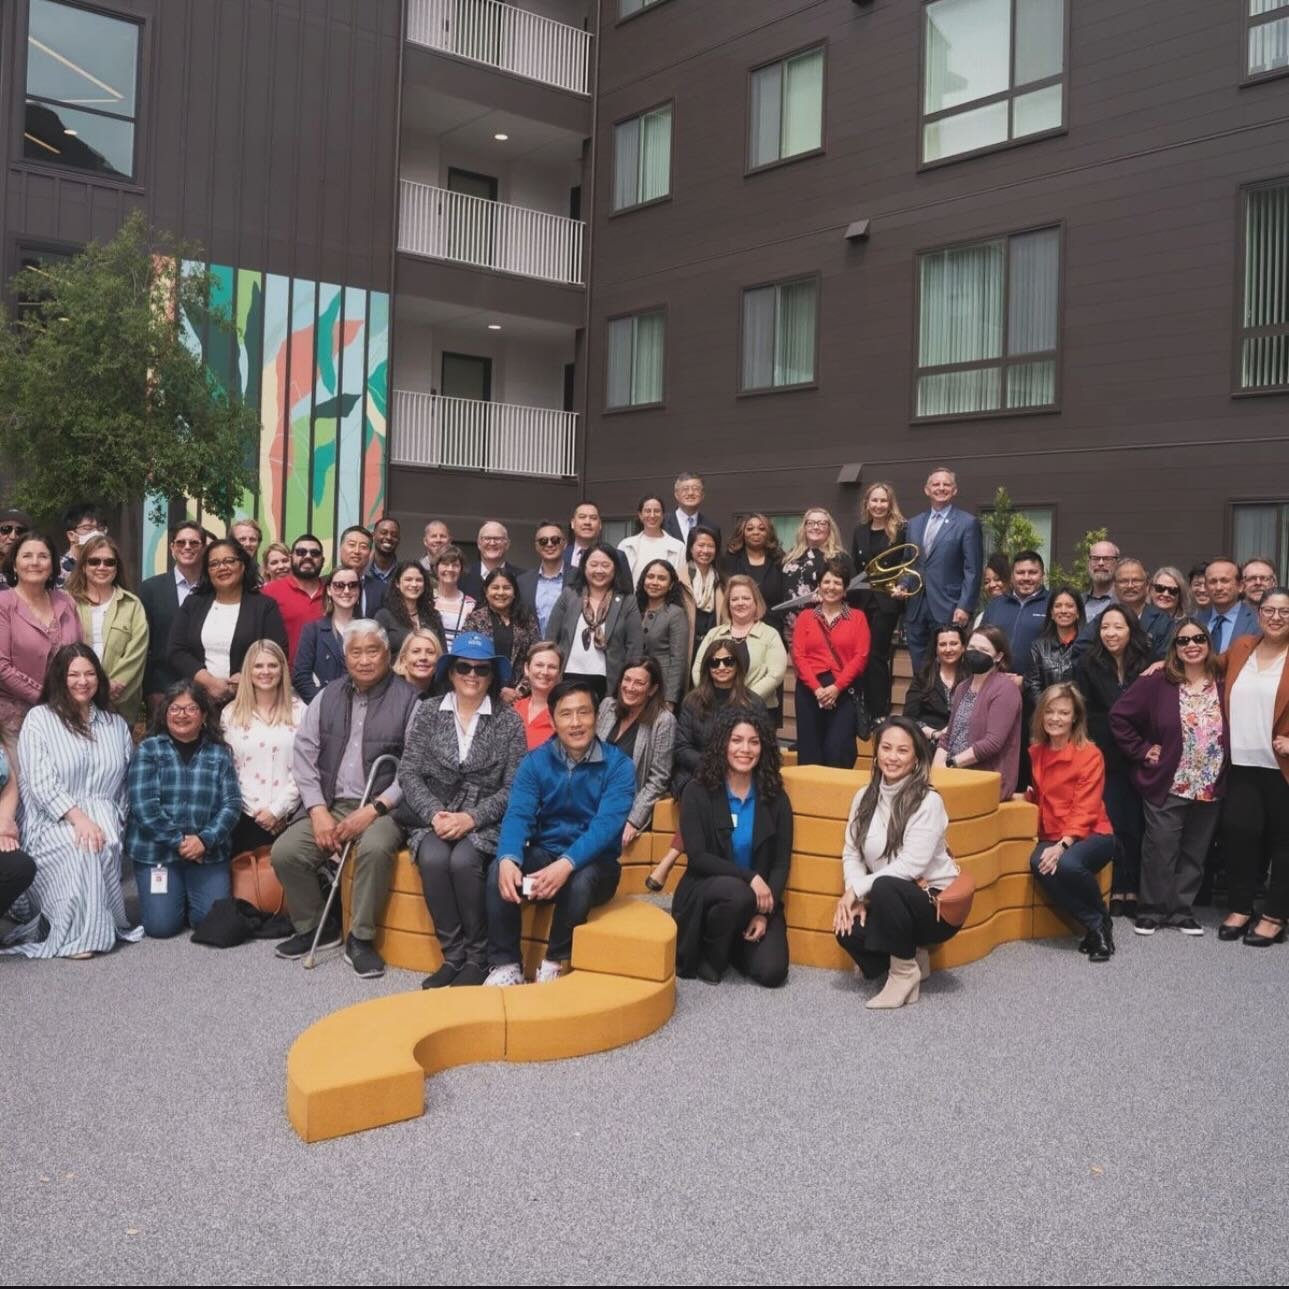 On April 23rd, Related California and its partners celebrated the opening of Meridian, a landmark affordable residence located in downtown Sunnyvale, CA. The community is the result of a public-private partnership with the City of Sunnyvale, Affordab